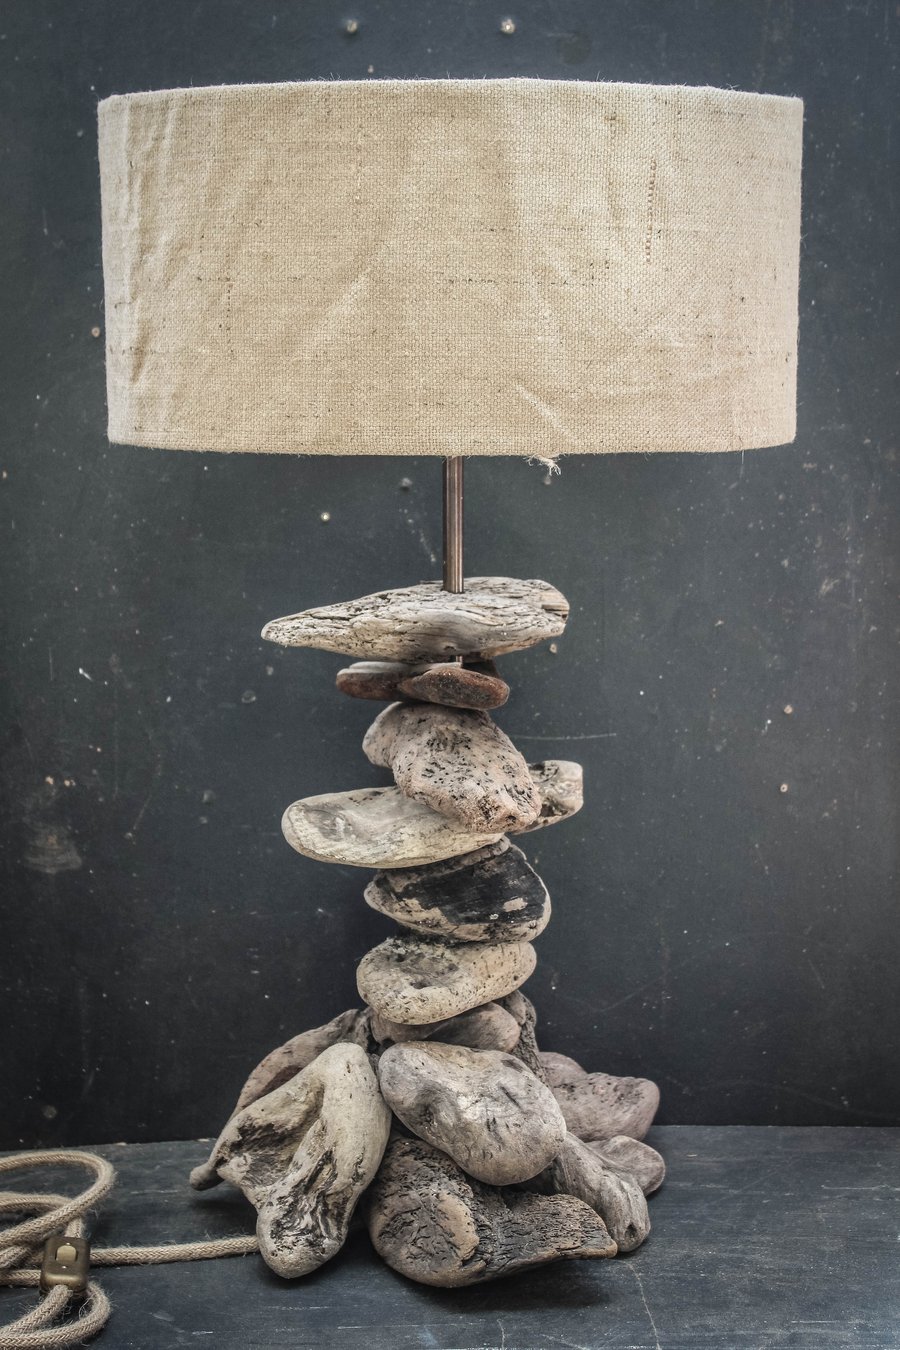  Driftwood Table Lamp,Rustic Driftwood Lamp,Drift Wood Table Lamp, with shade